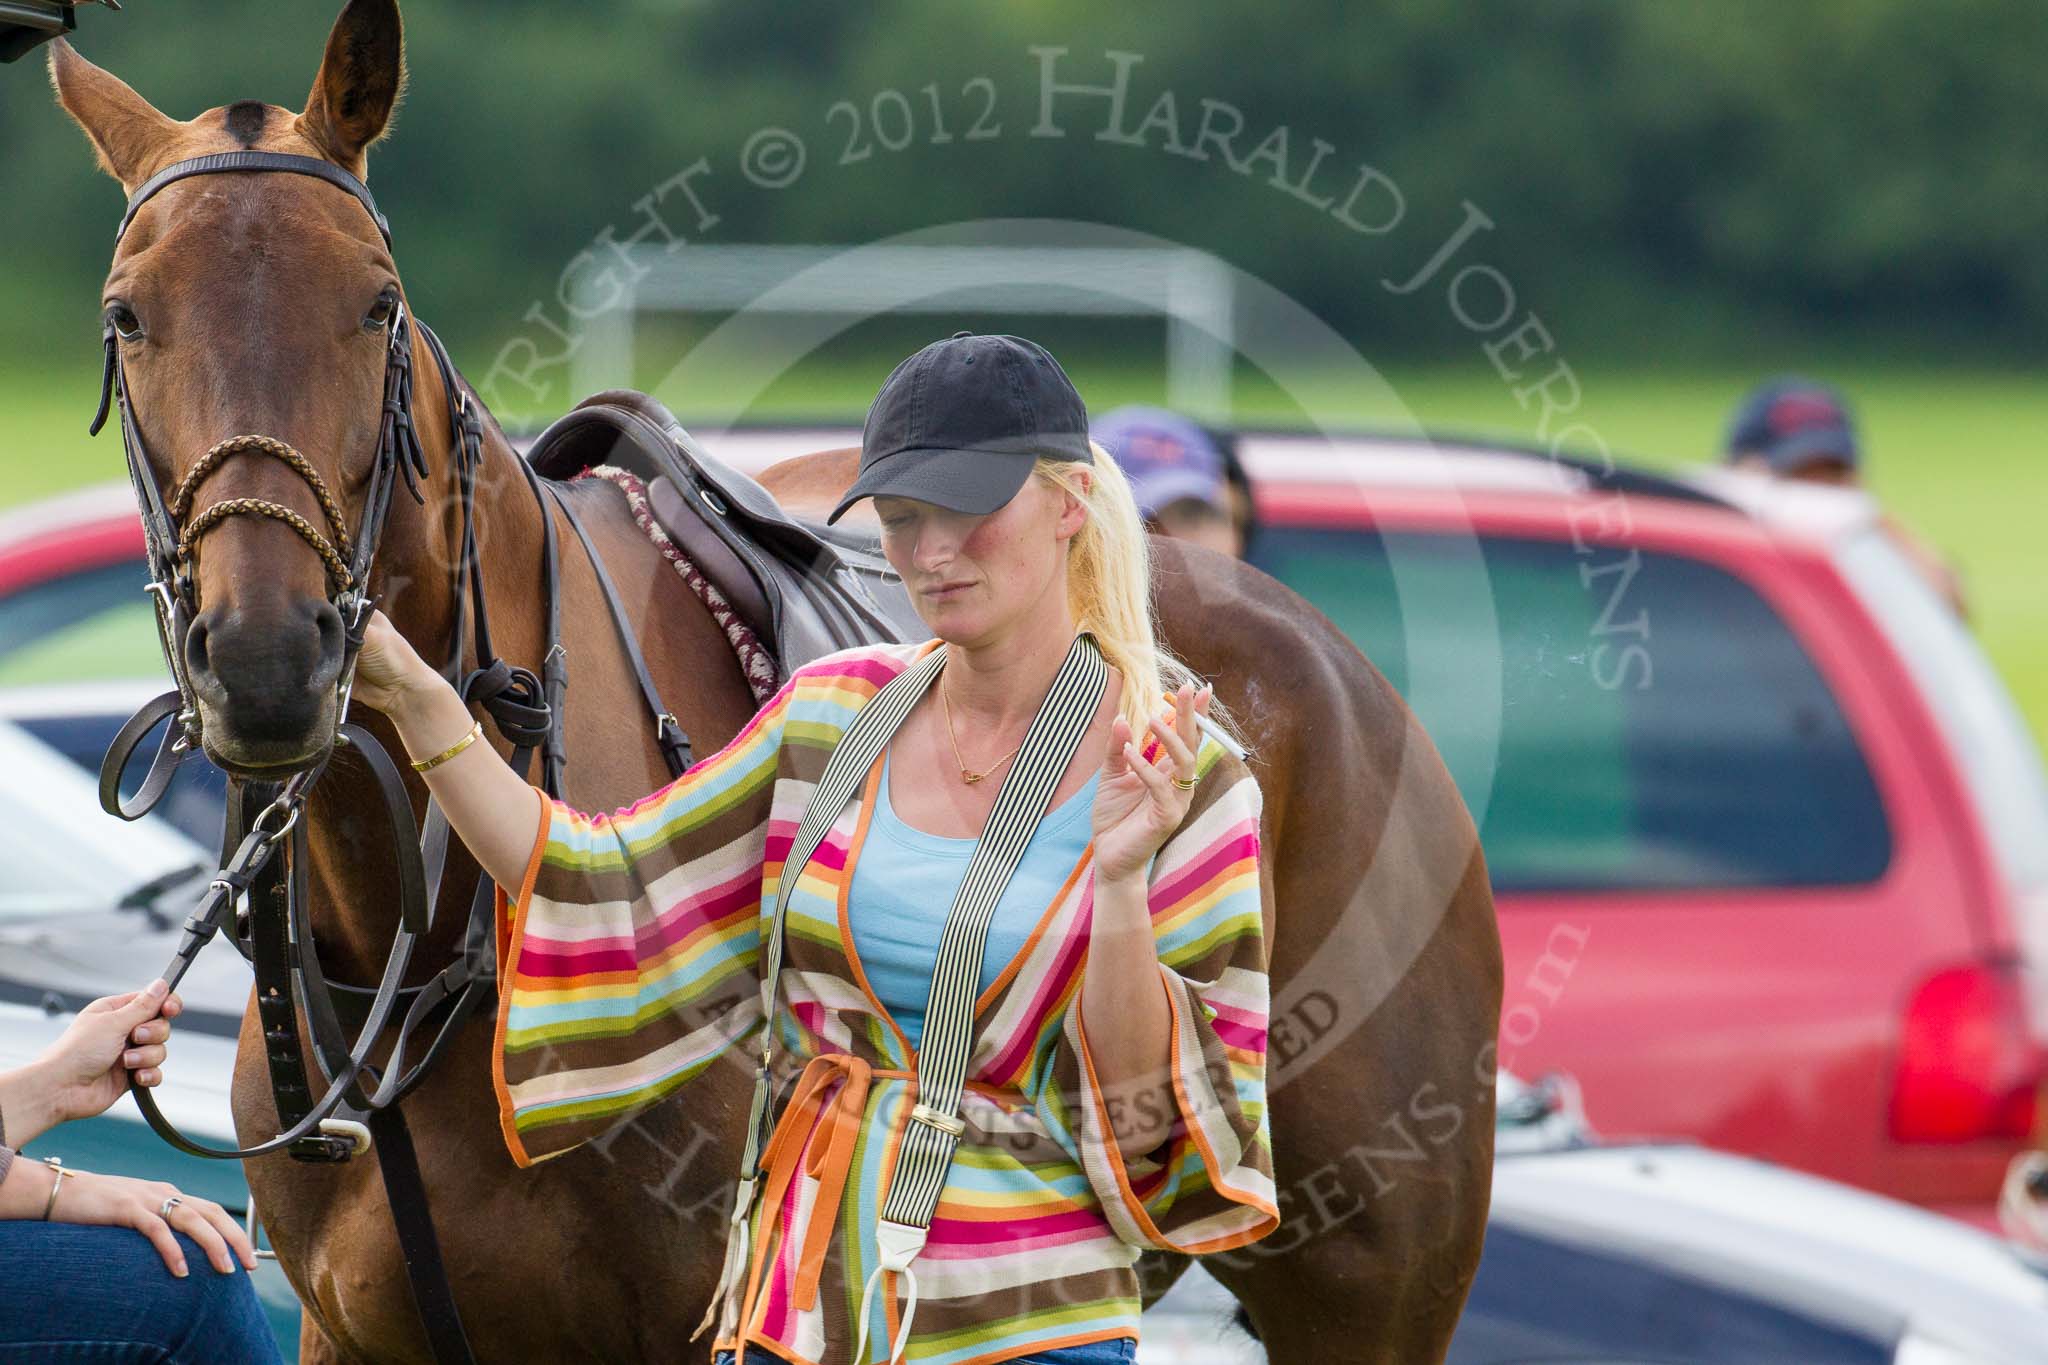 7th Heritage Polo Cup semi-finals: Supporter of Timothy Rose..
Hurtwood Park Polo Club,
Ewhurst Green,
Surrey,
United Kingdom,
on 04 August 2012 at 16:51, image #336